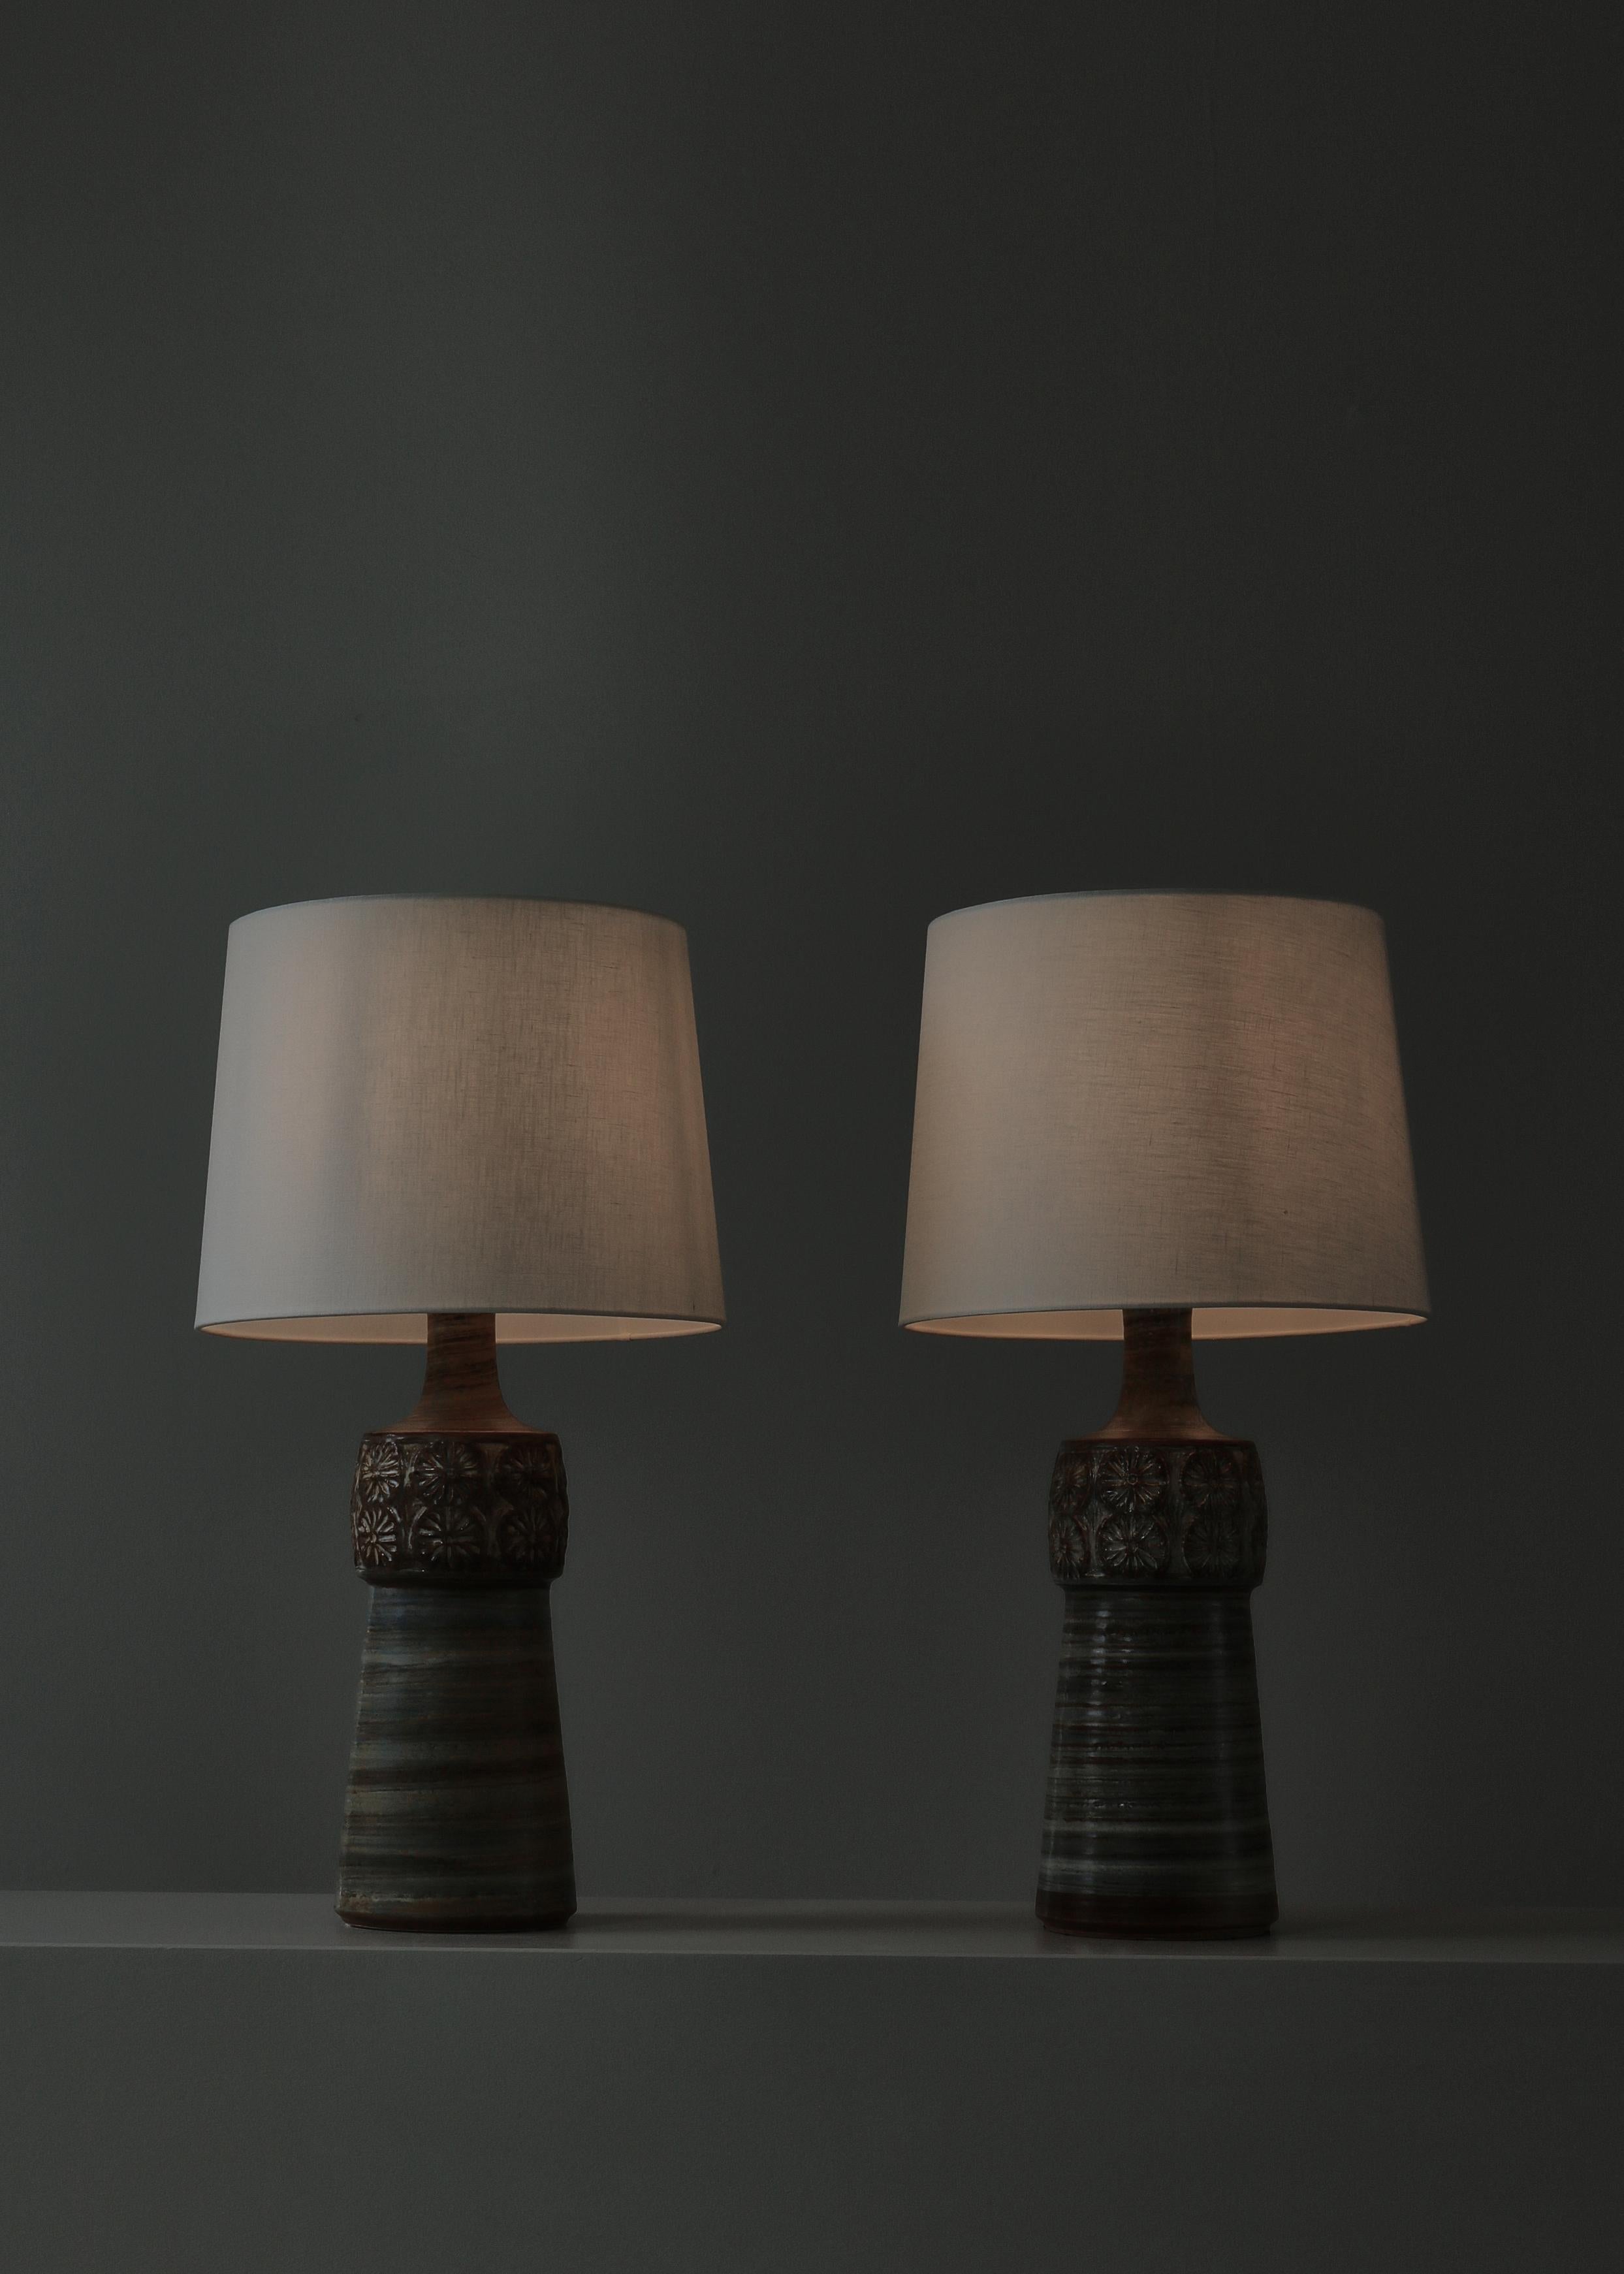 Pair of Unique Danish Modern Stoneware Table Lamps by Søholm, Denmark, 1960s For Sale 1